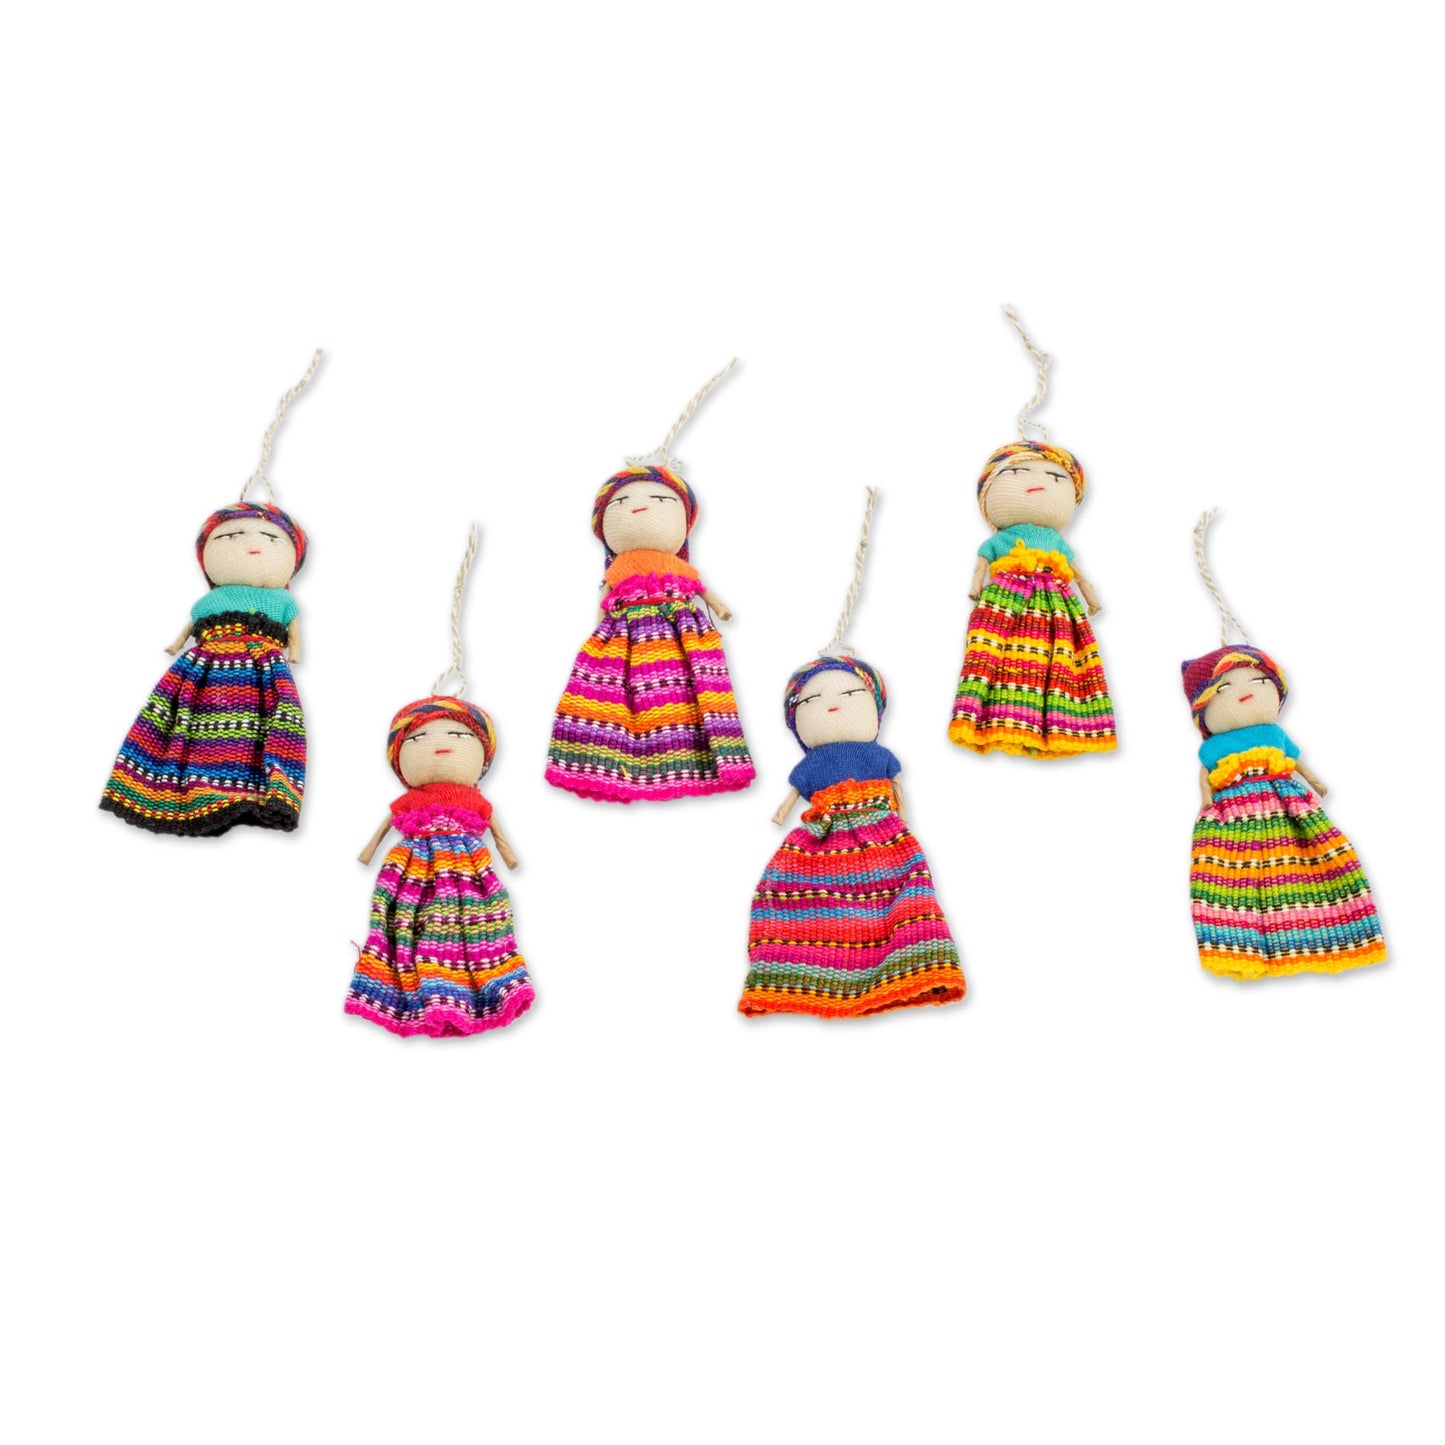 Worry Dolls Share The Love Ornaments